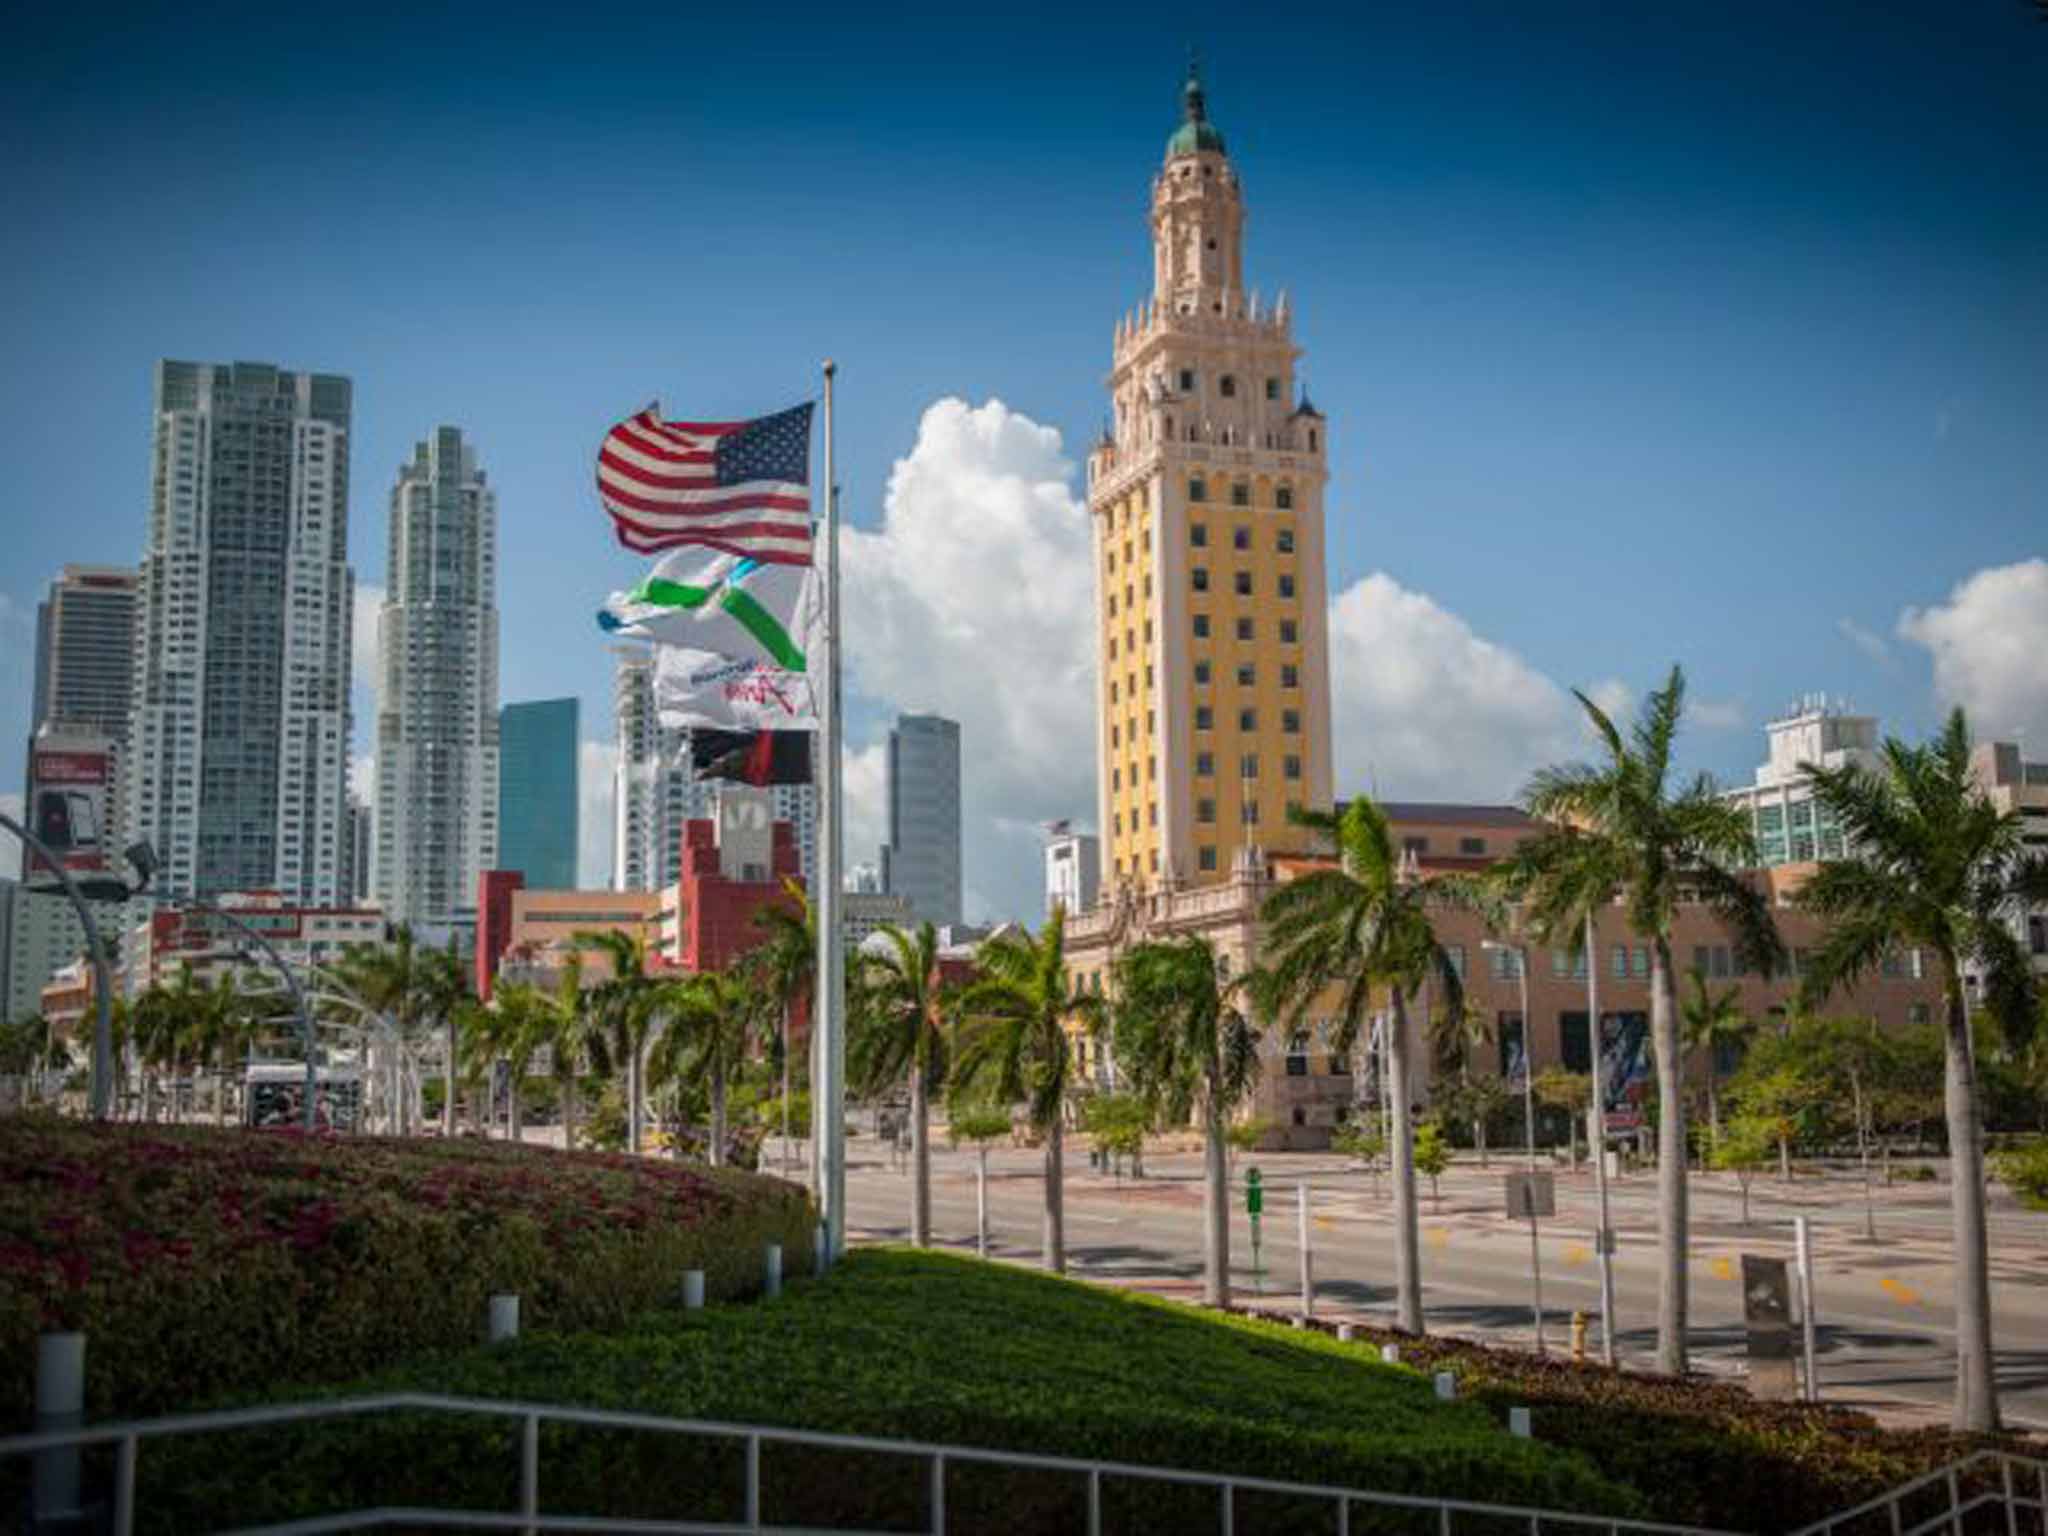 The Freedom Tower in Downtown Miami